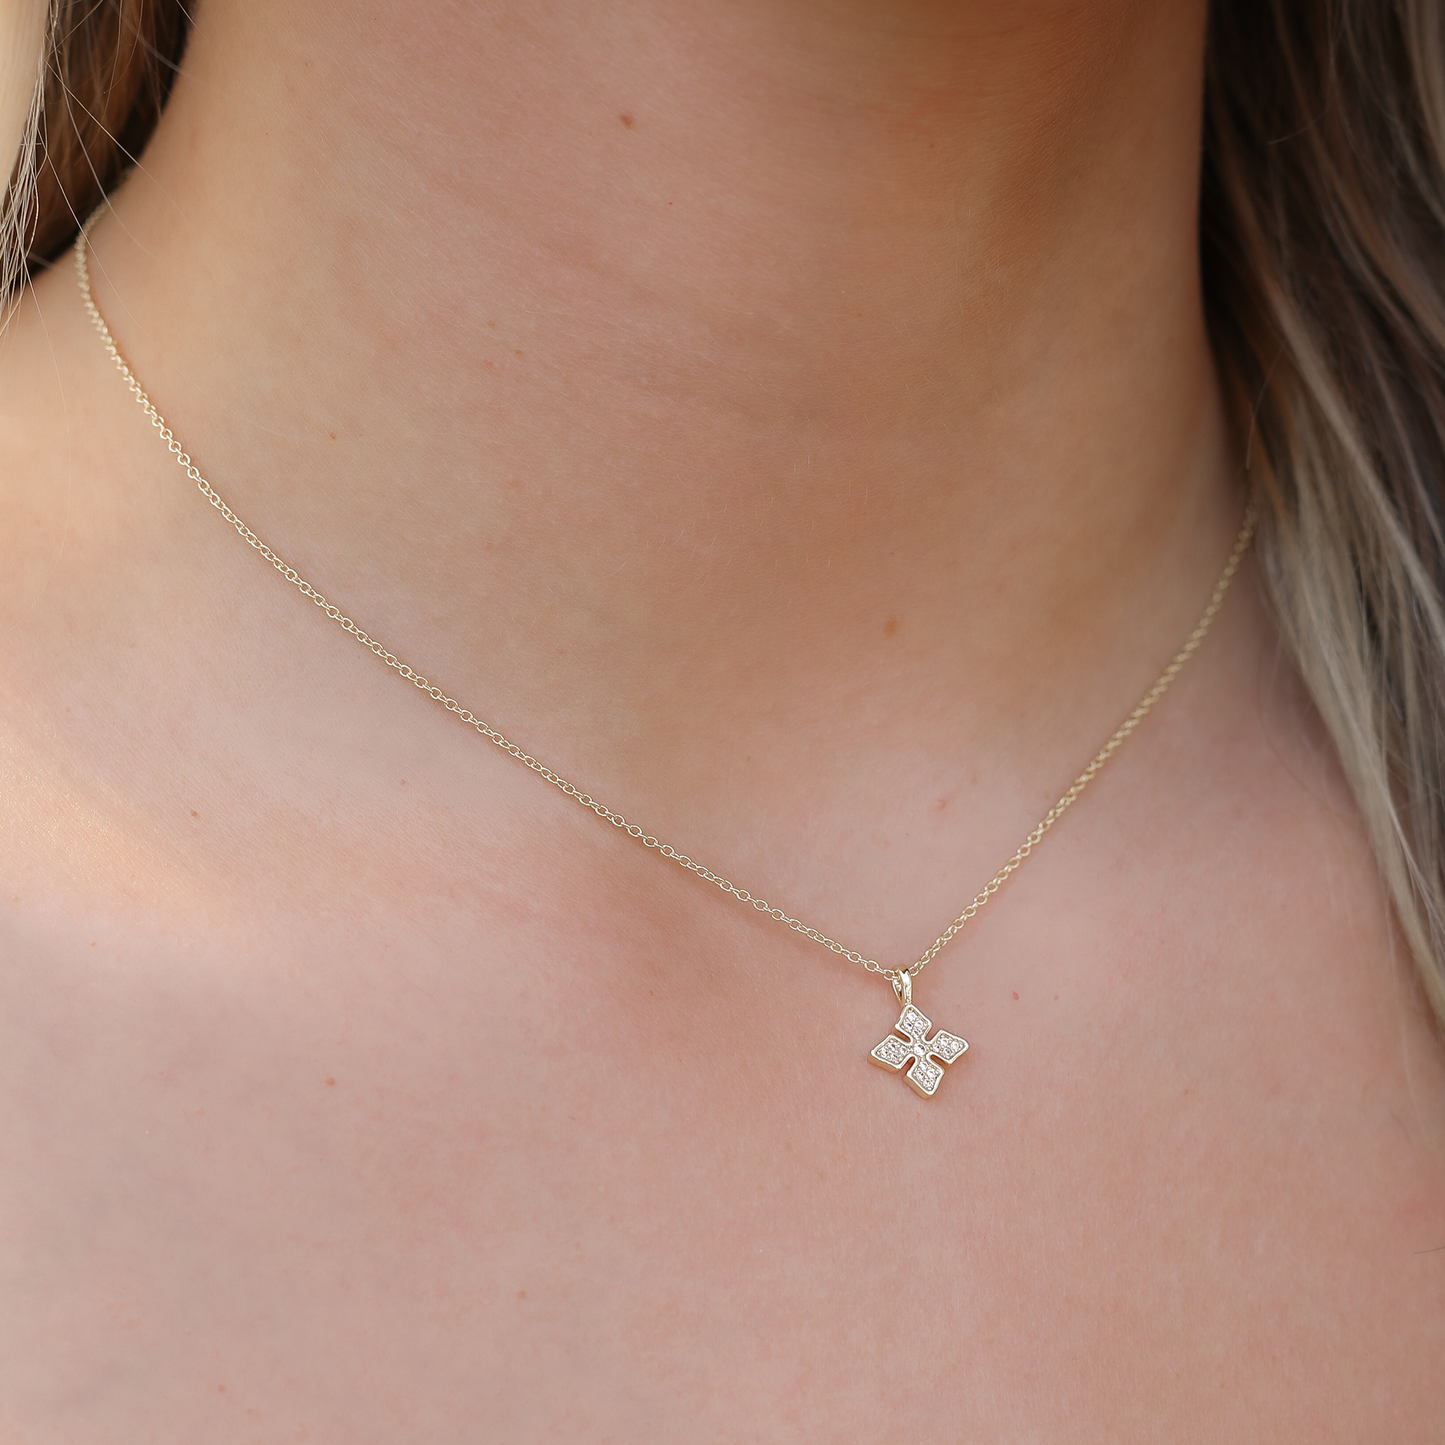 Natalie Wood Designs "Shine Bright" Cross Necklace-Gold